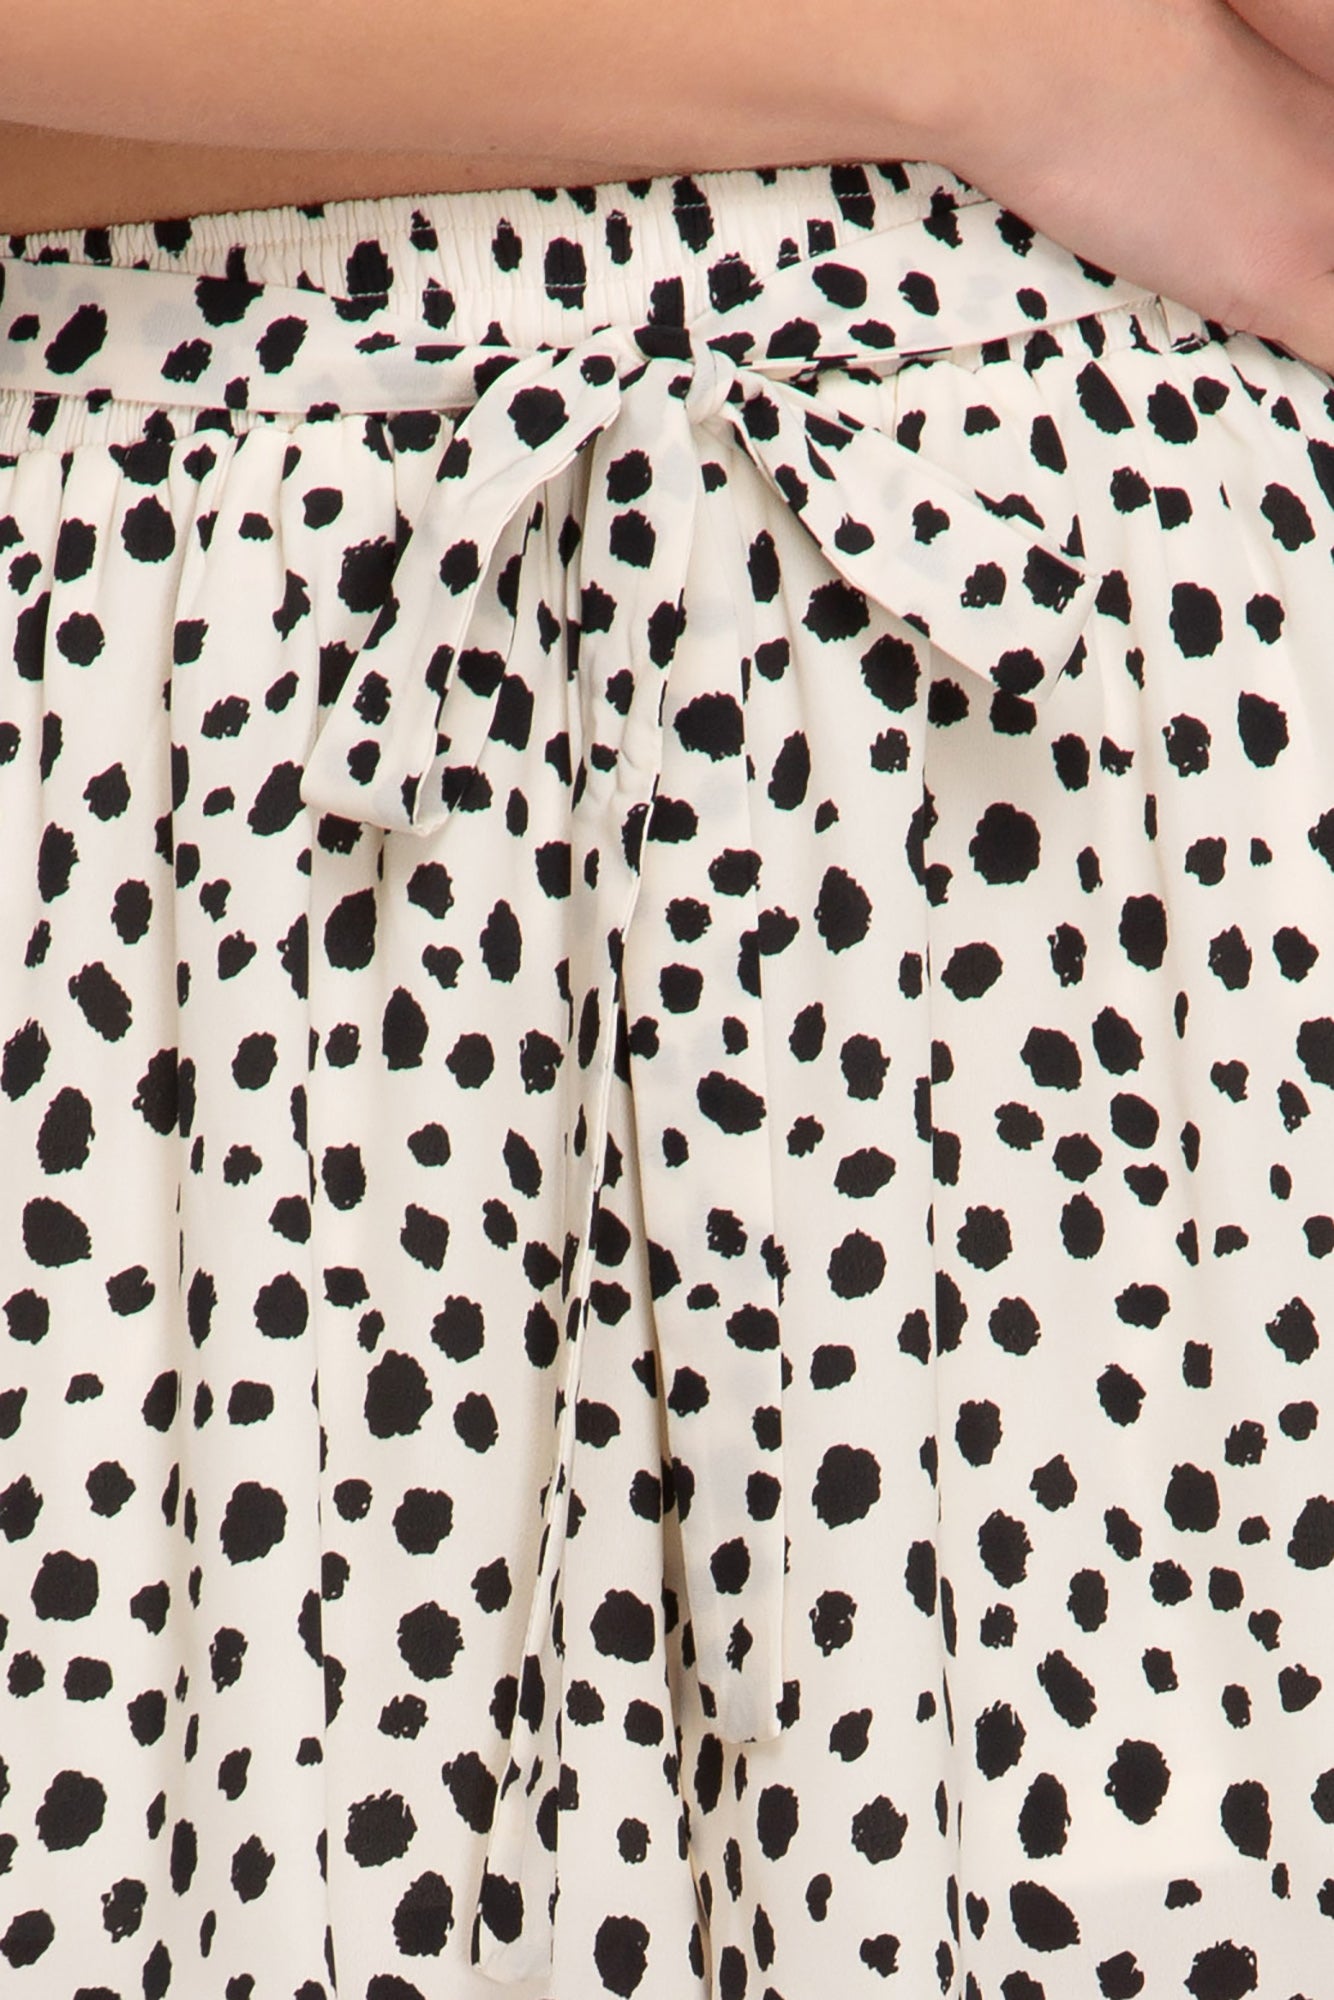 Sasha Elastic Animal Print Shorts - Corinne an Affordable Women's Clothing Boutique in the US USA